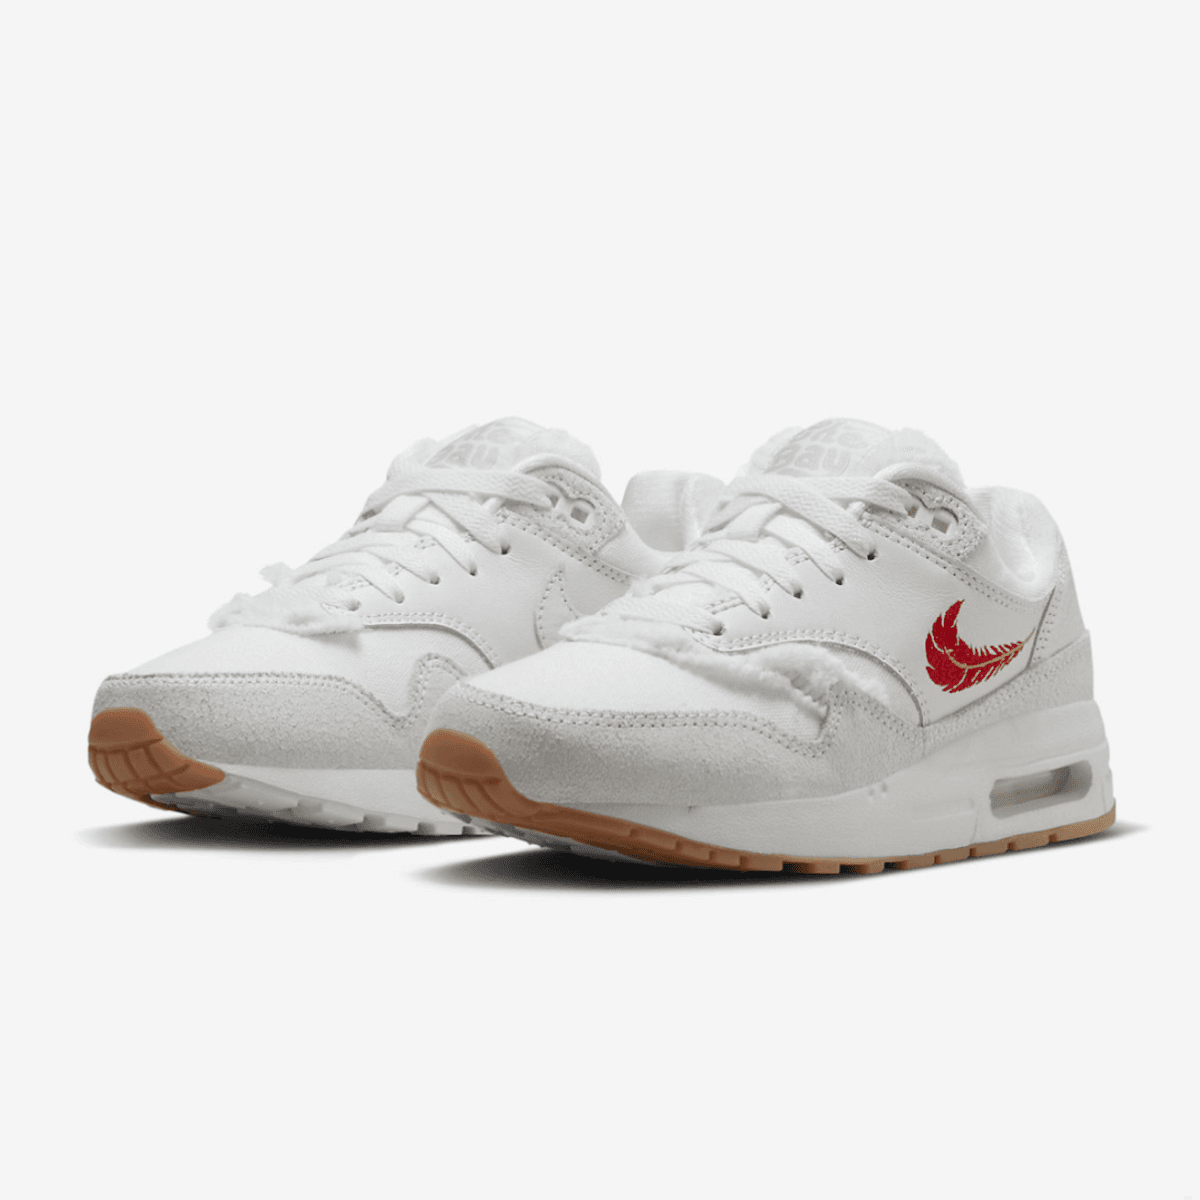 The Nike Air Max 1 The Bay Is Dedicated To The Bay Area